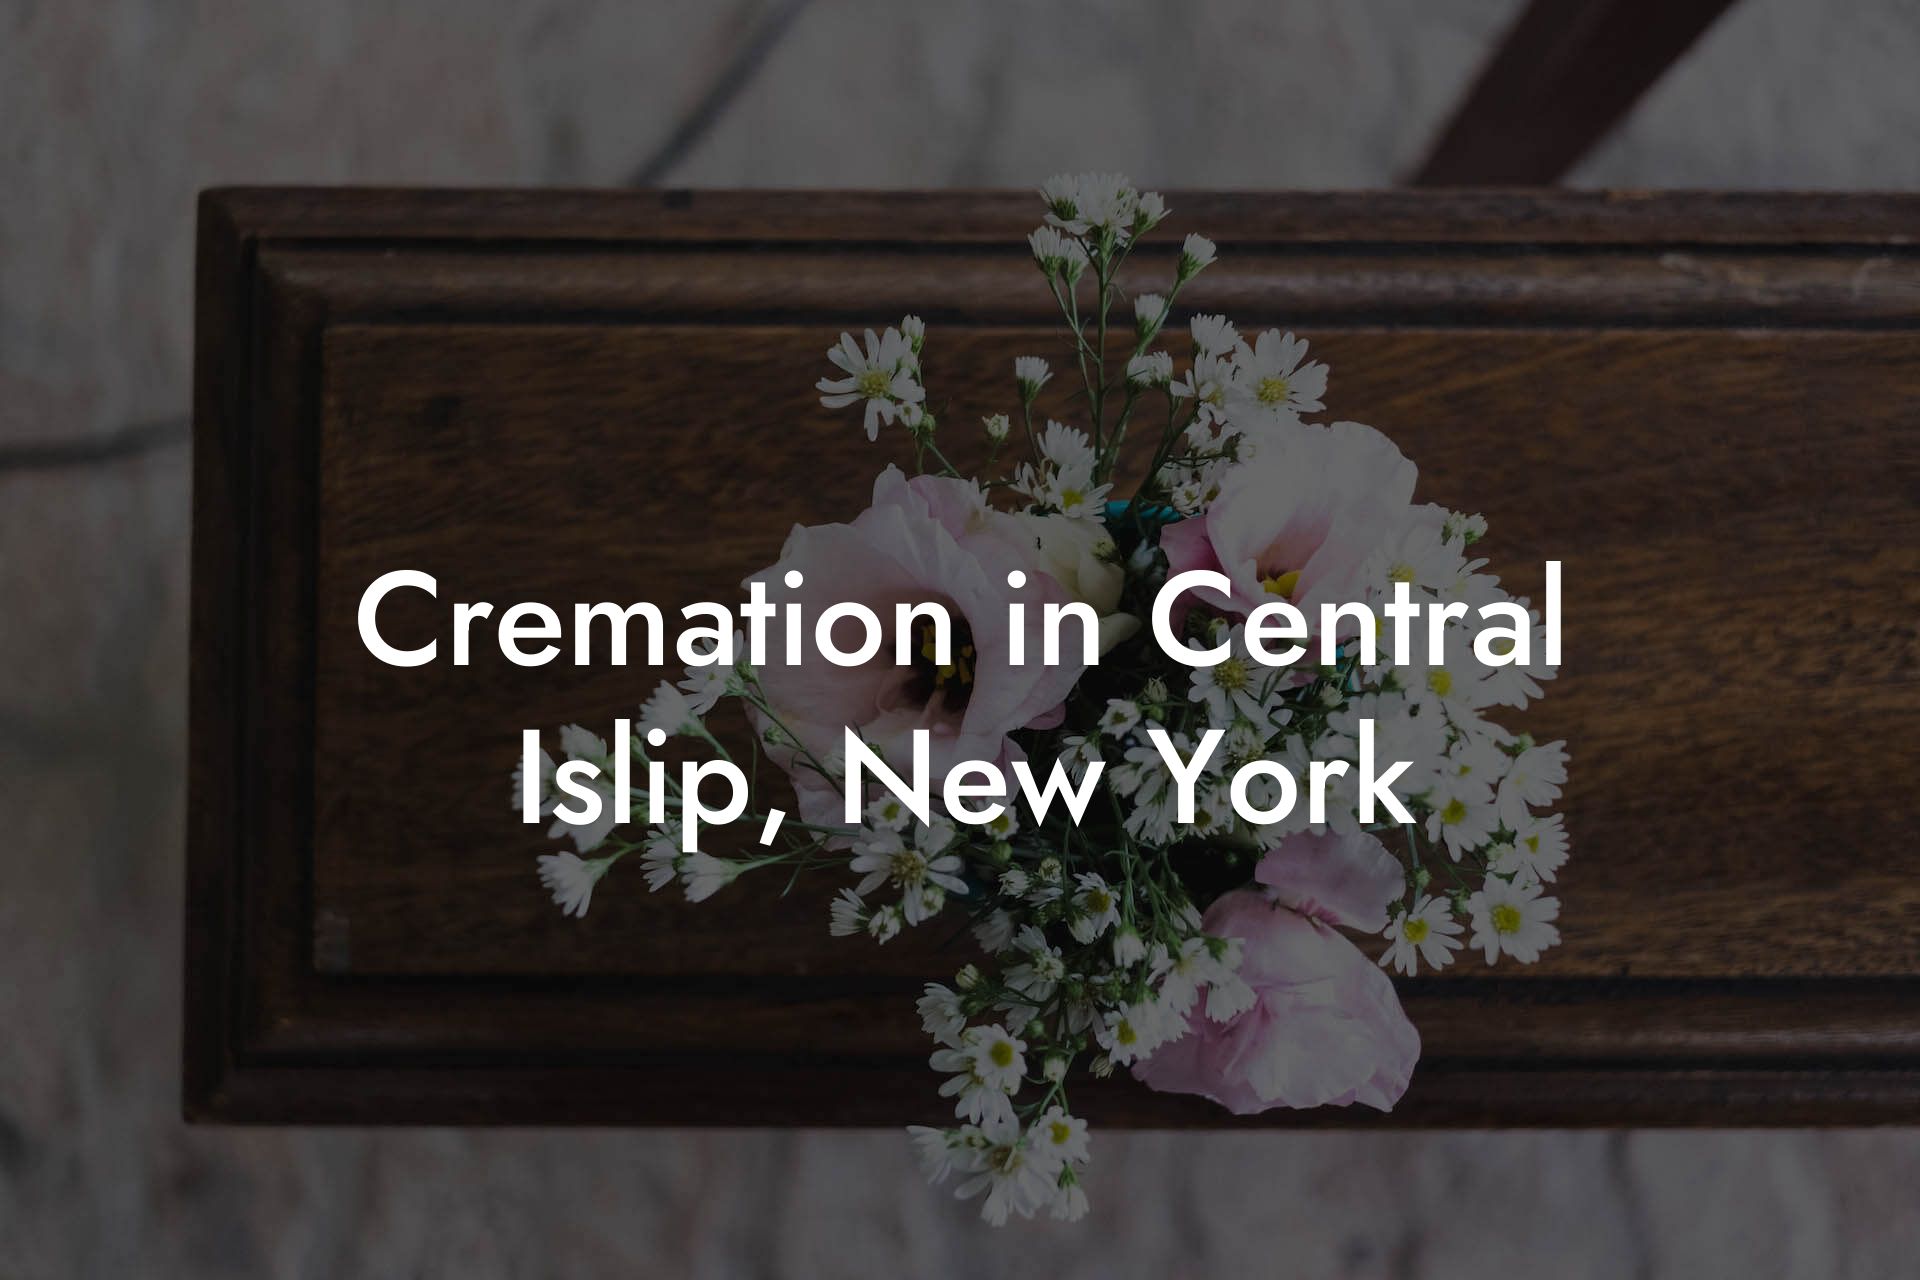 Cremation in Central Islip, New York